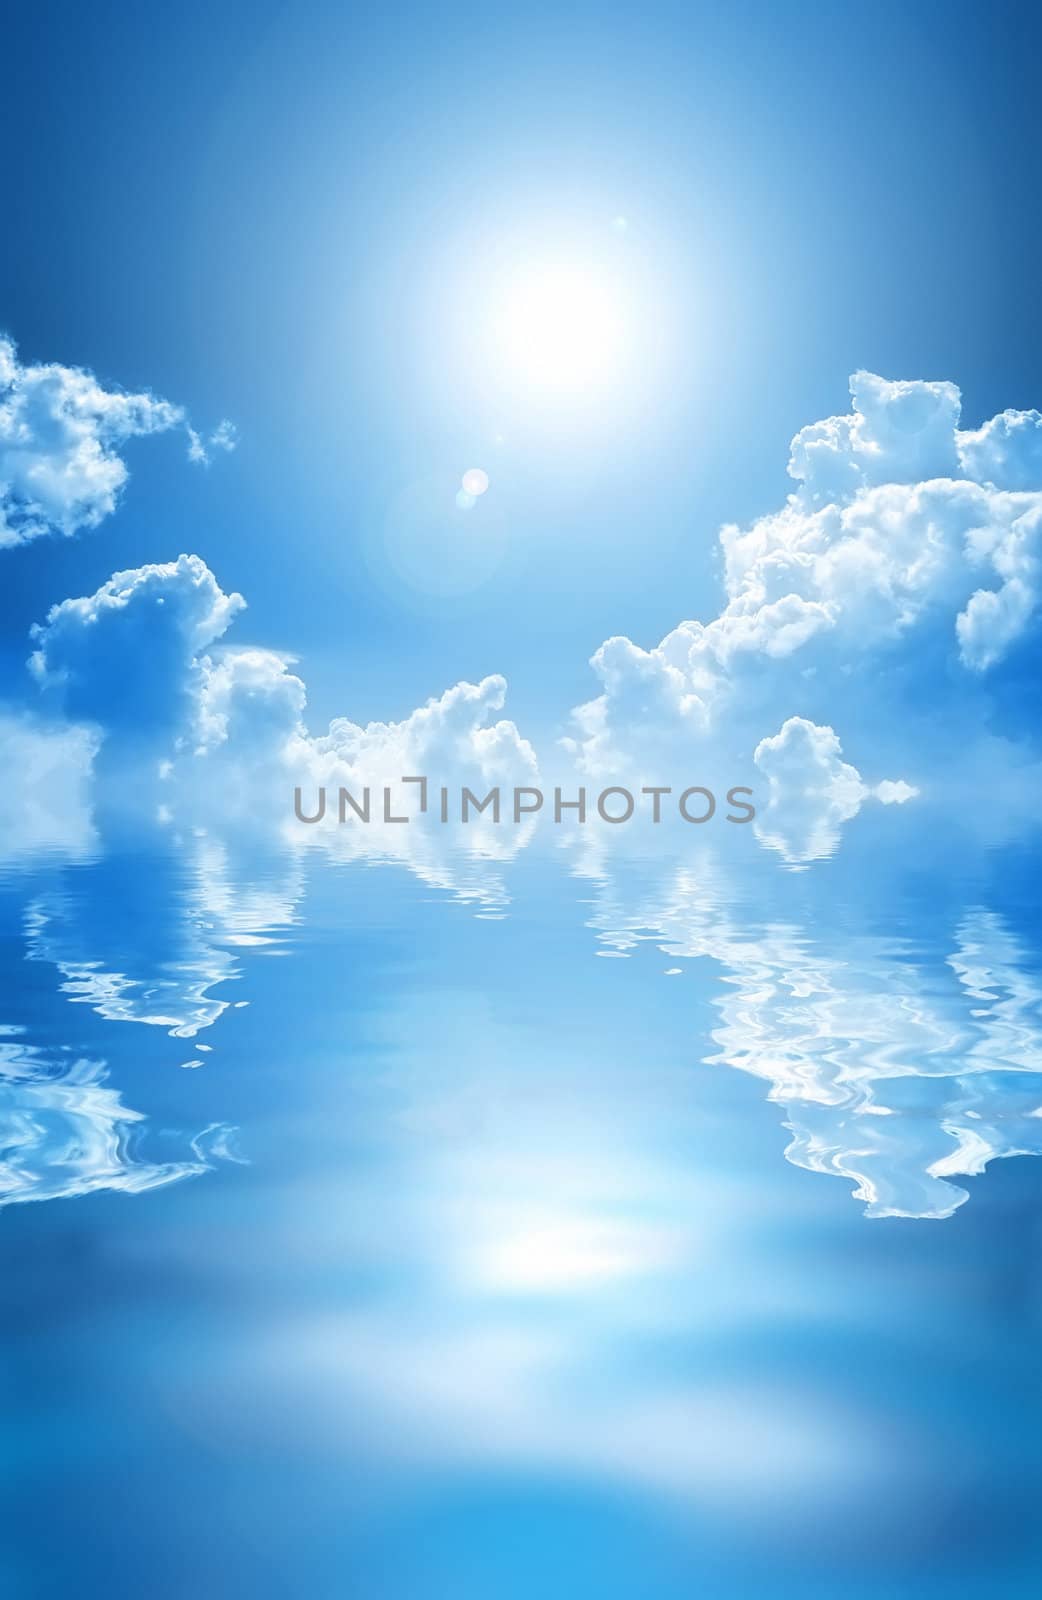 An image of a beautiful blue sky ocean background